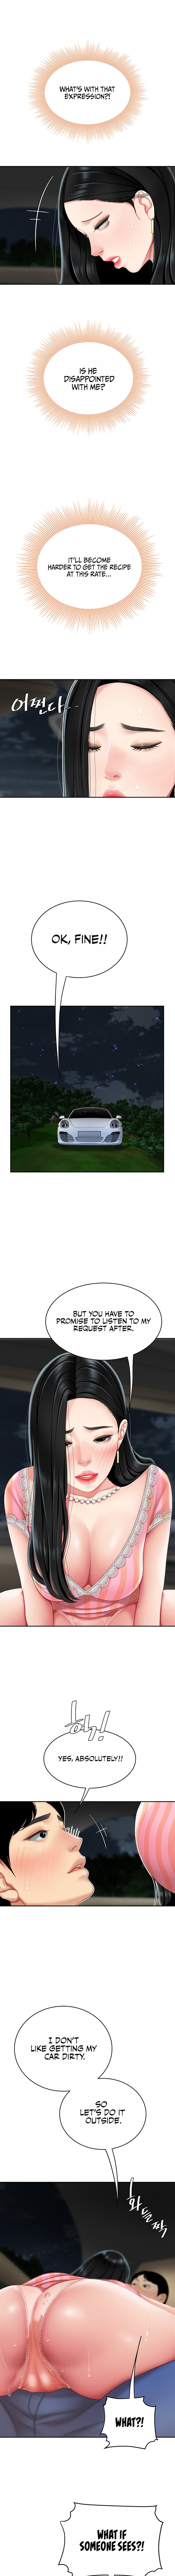 I Want A Taste - Chapter 11 Page 7